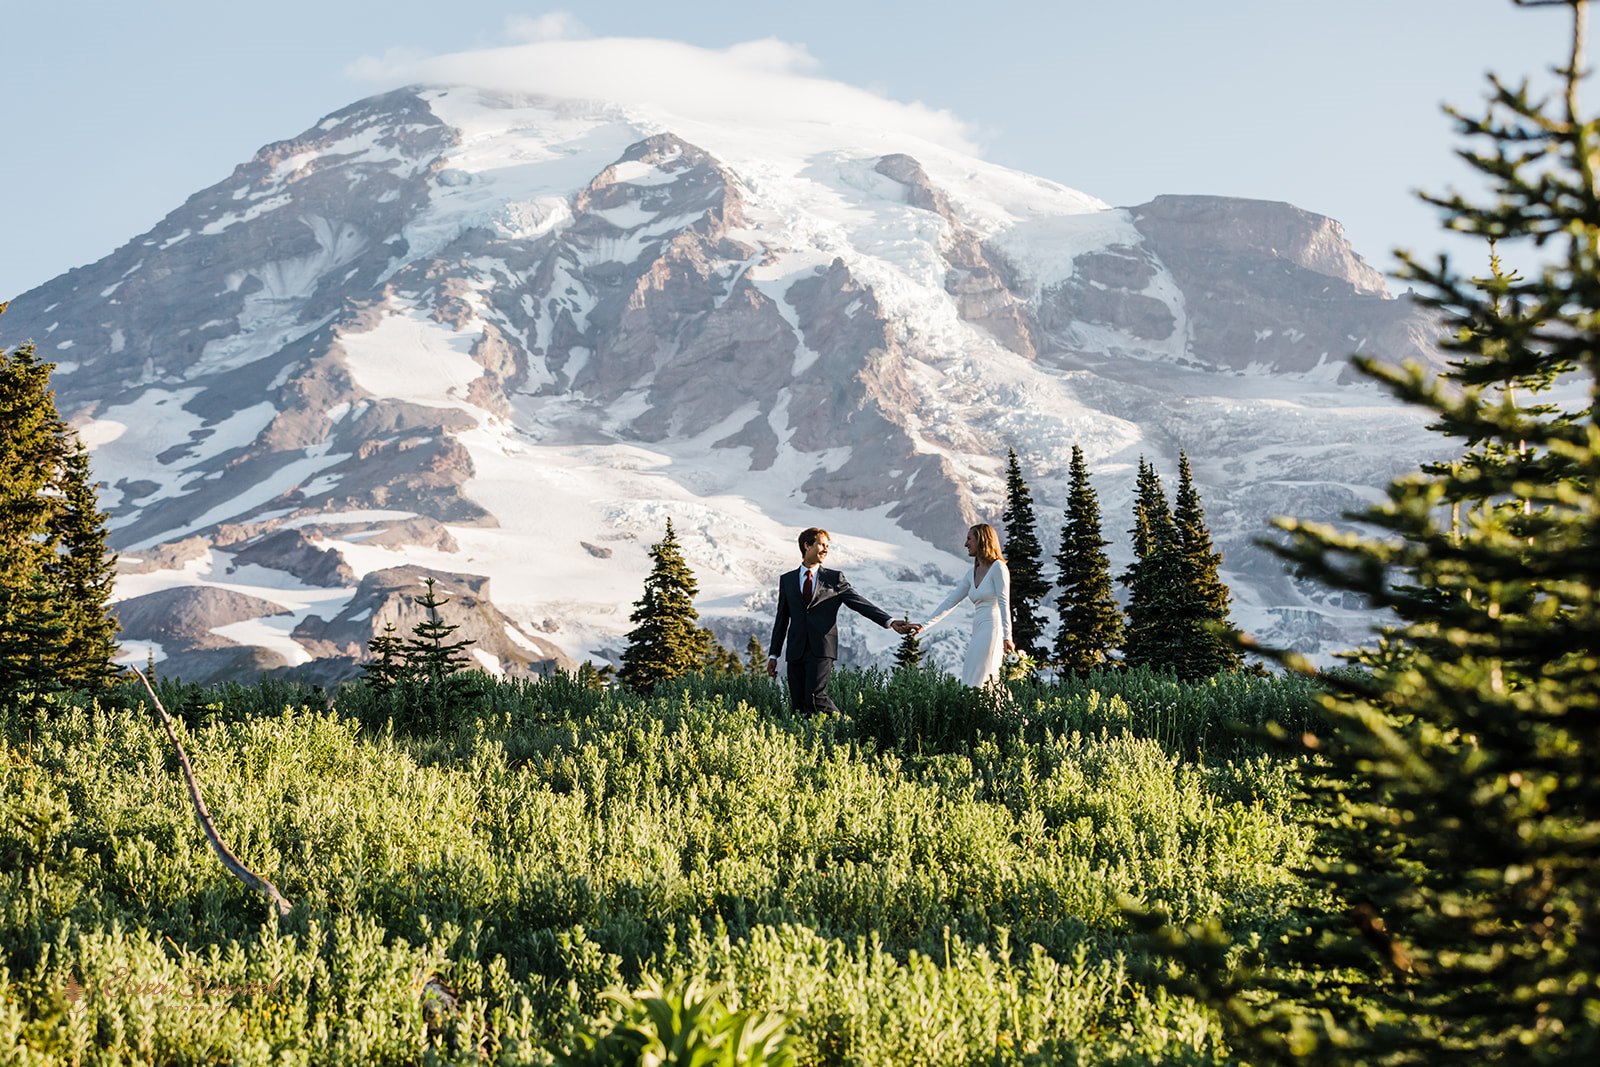 A hiking elopement couple adventures along a wildflower meadow trail to one of their Mt. Rainier wedding locations.